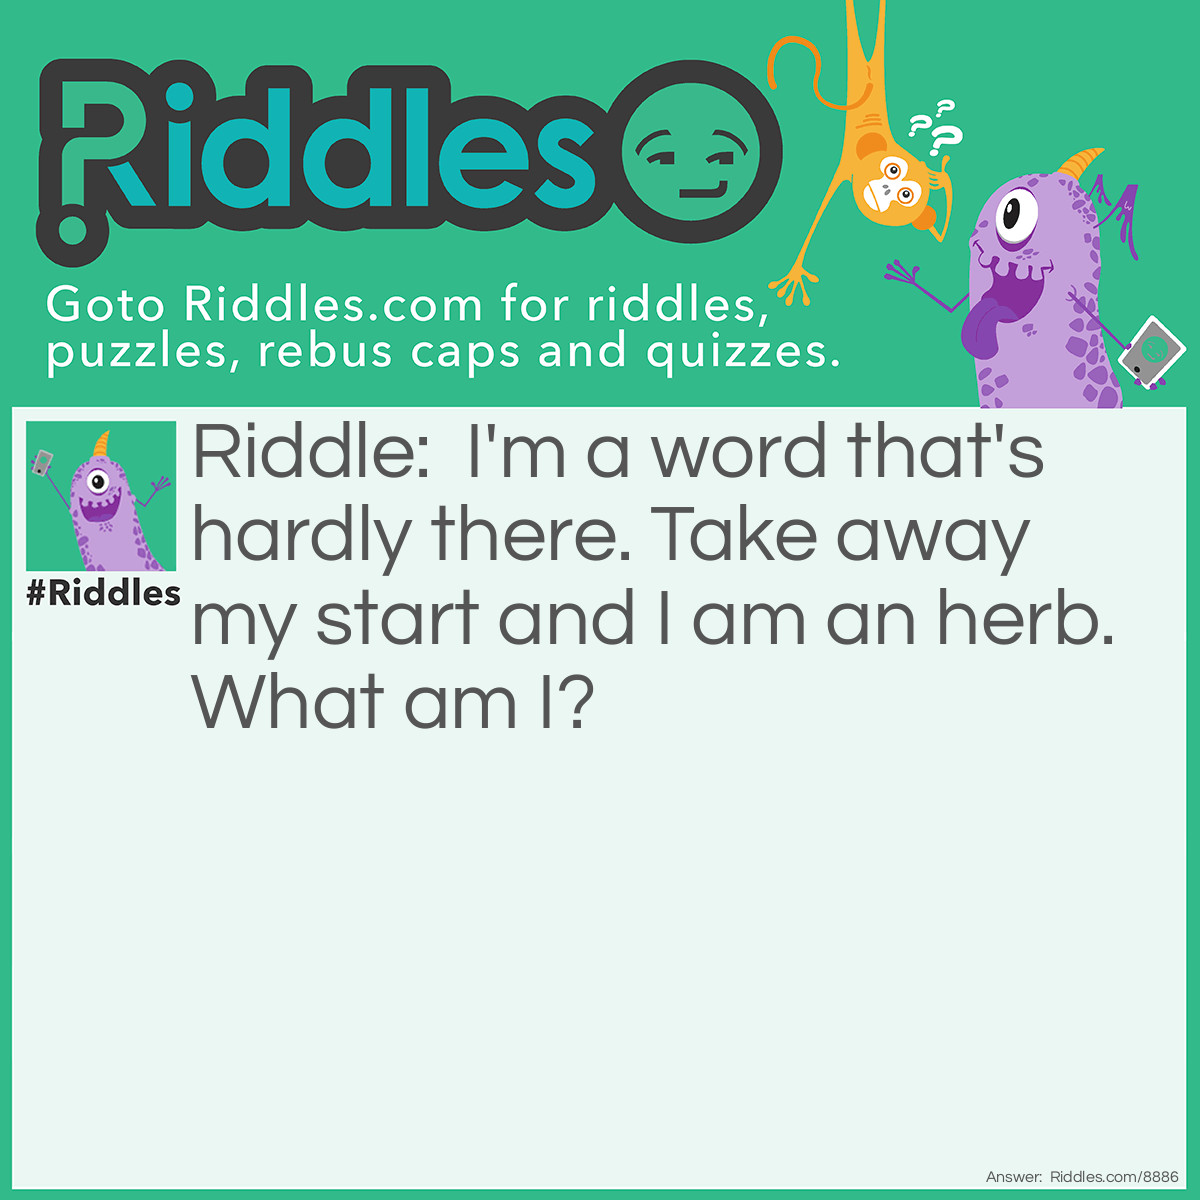 Riddle: I'm a word that's hardly there. Take away my start and I am an herb. What am I? Answer: Sparsely.